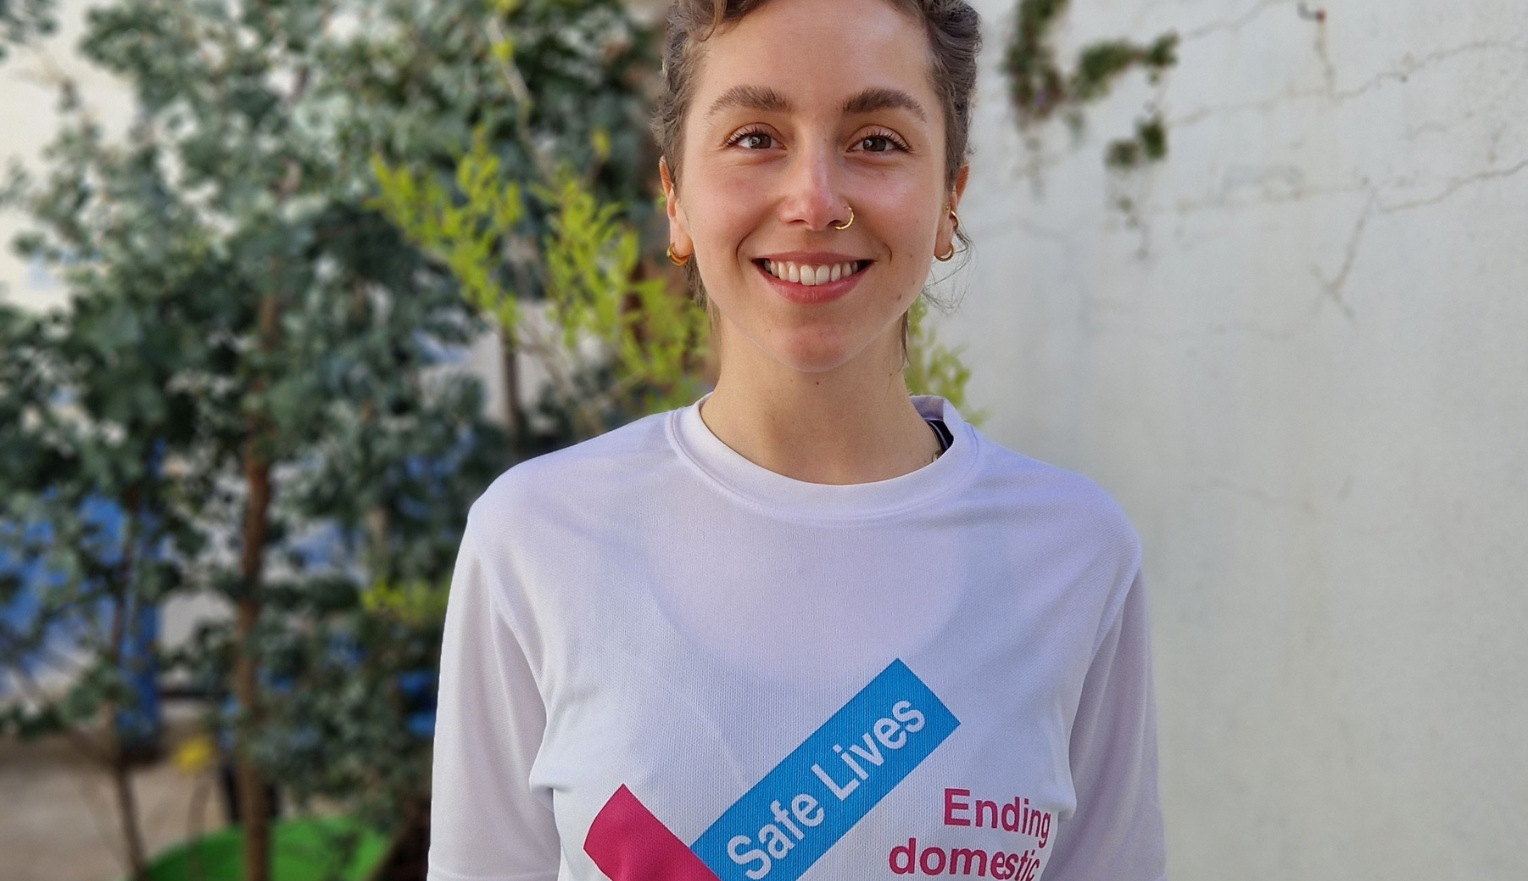 A woman wearing a SafeLives fundraising T-shirt.